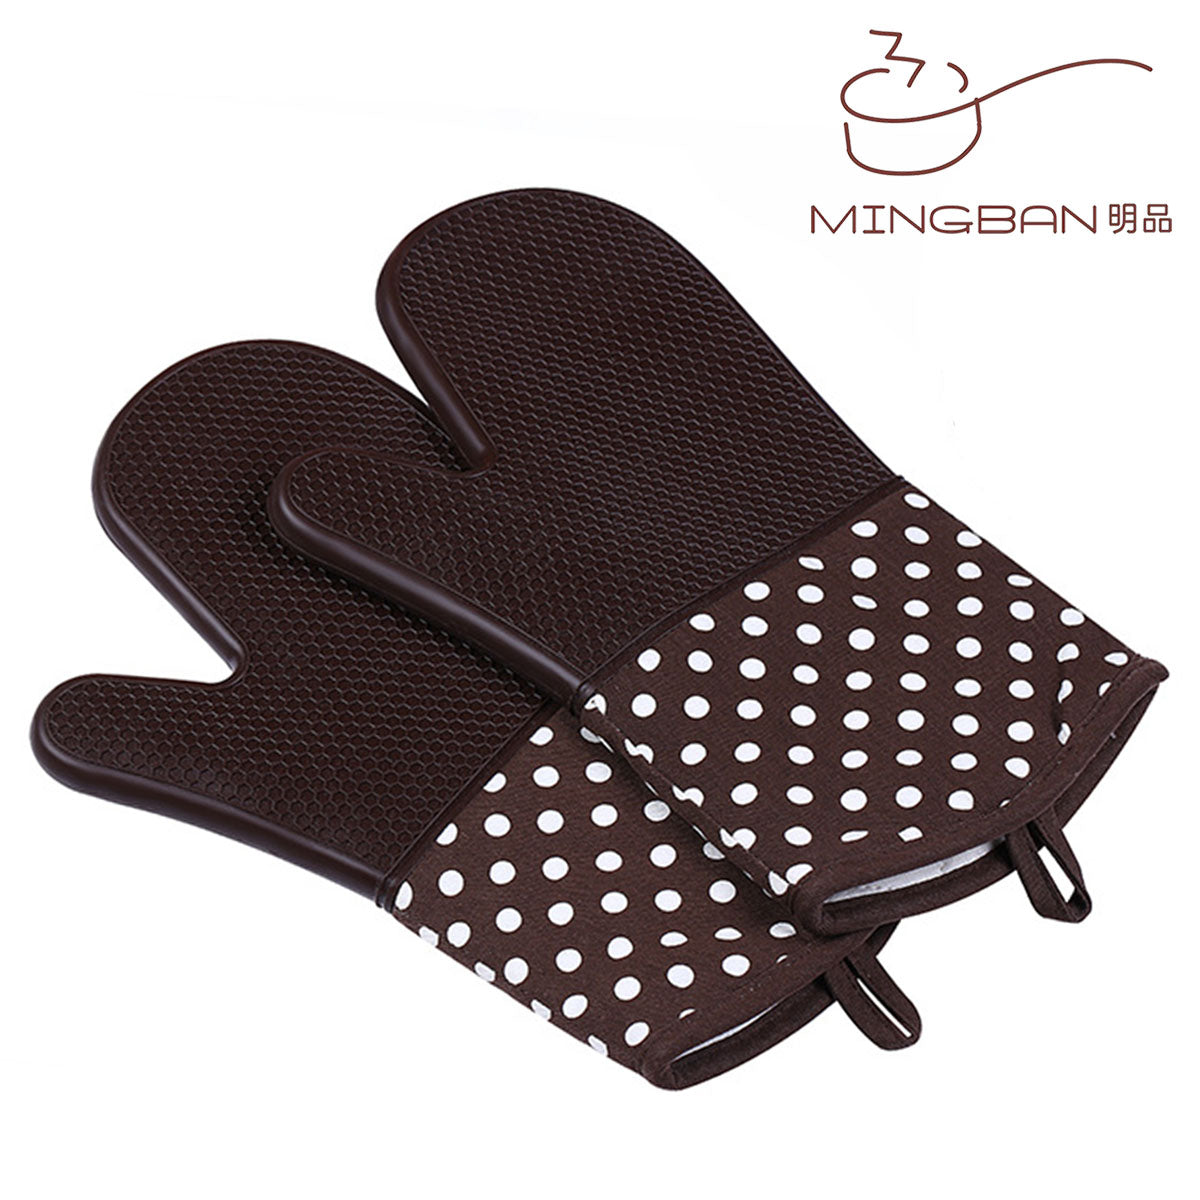 Heat Resistant Silicone Oven Mitt - Brown Polka Dot